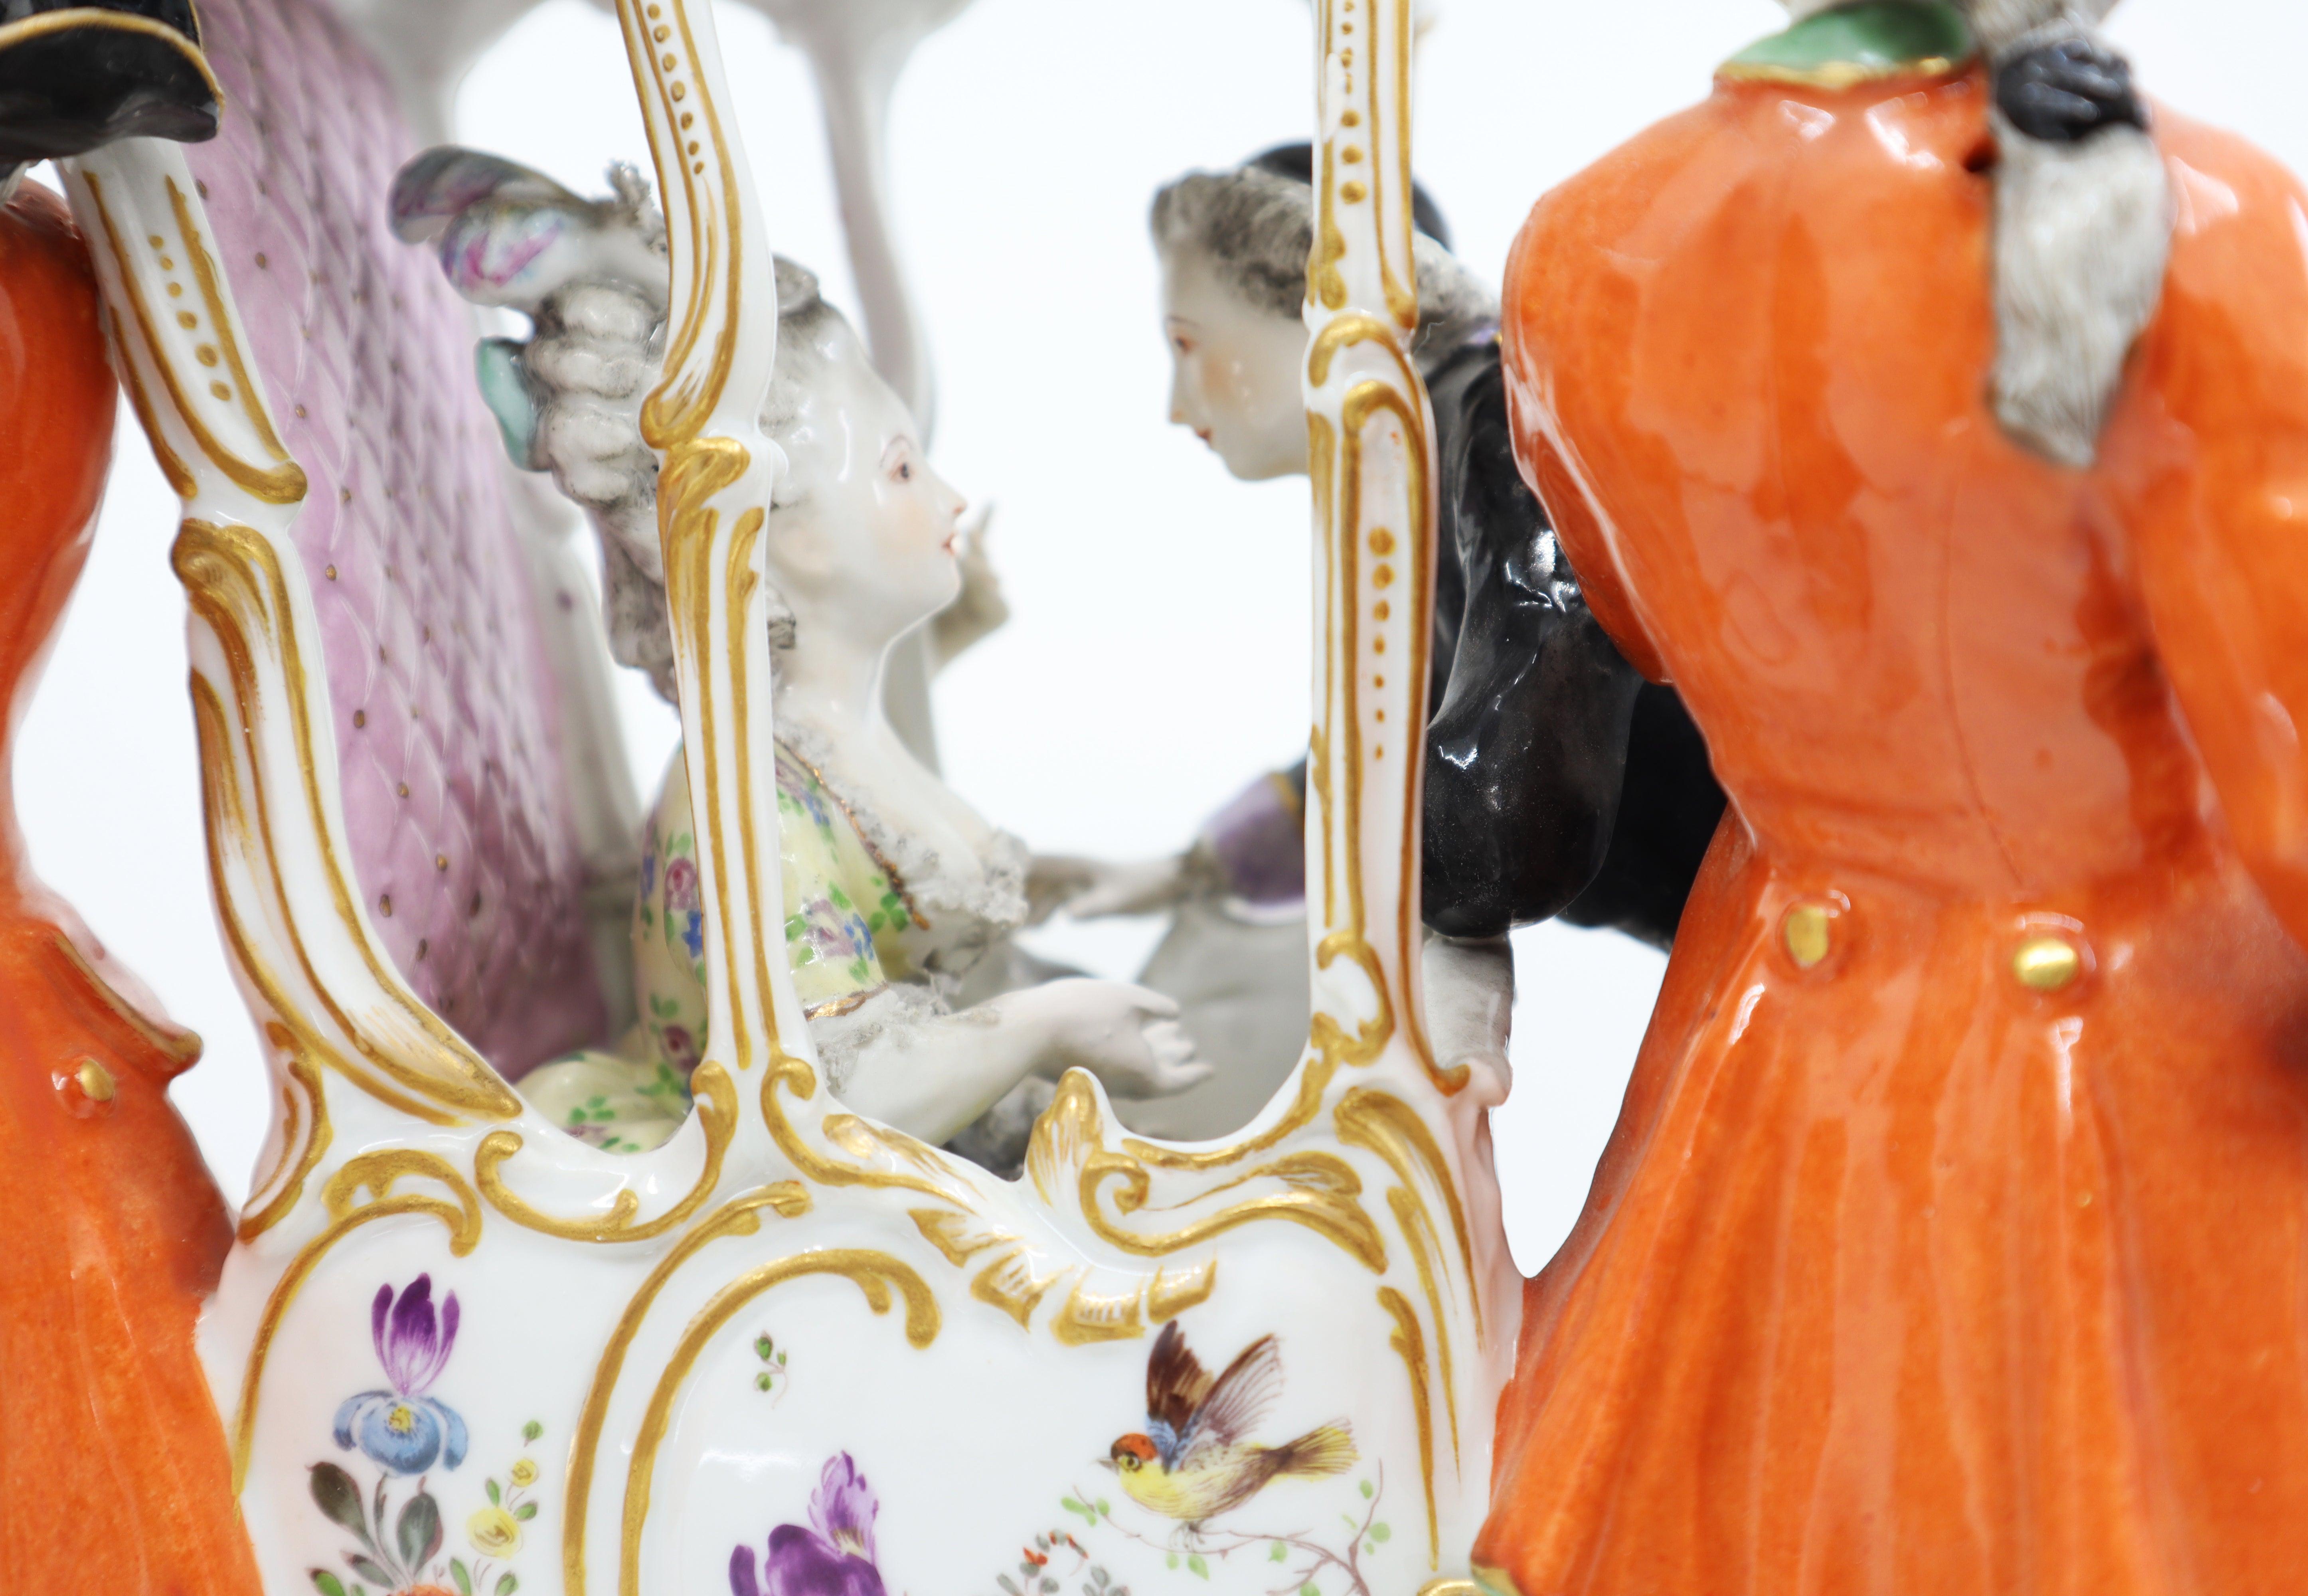 Hand Painted Porcelain, 2 Valets and a Couple, 19th Century, Vienna, Austria For Sale 5